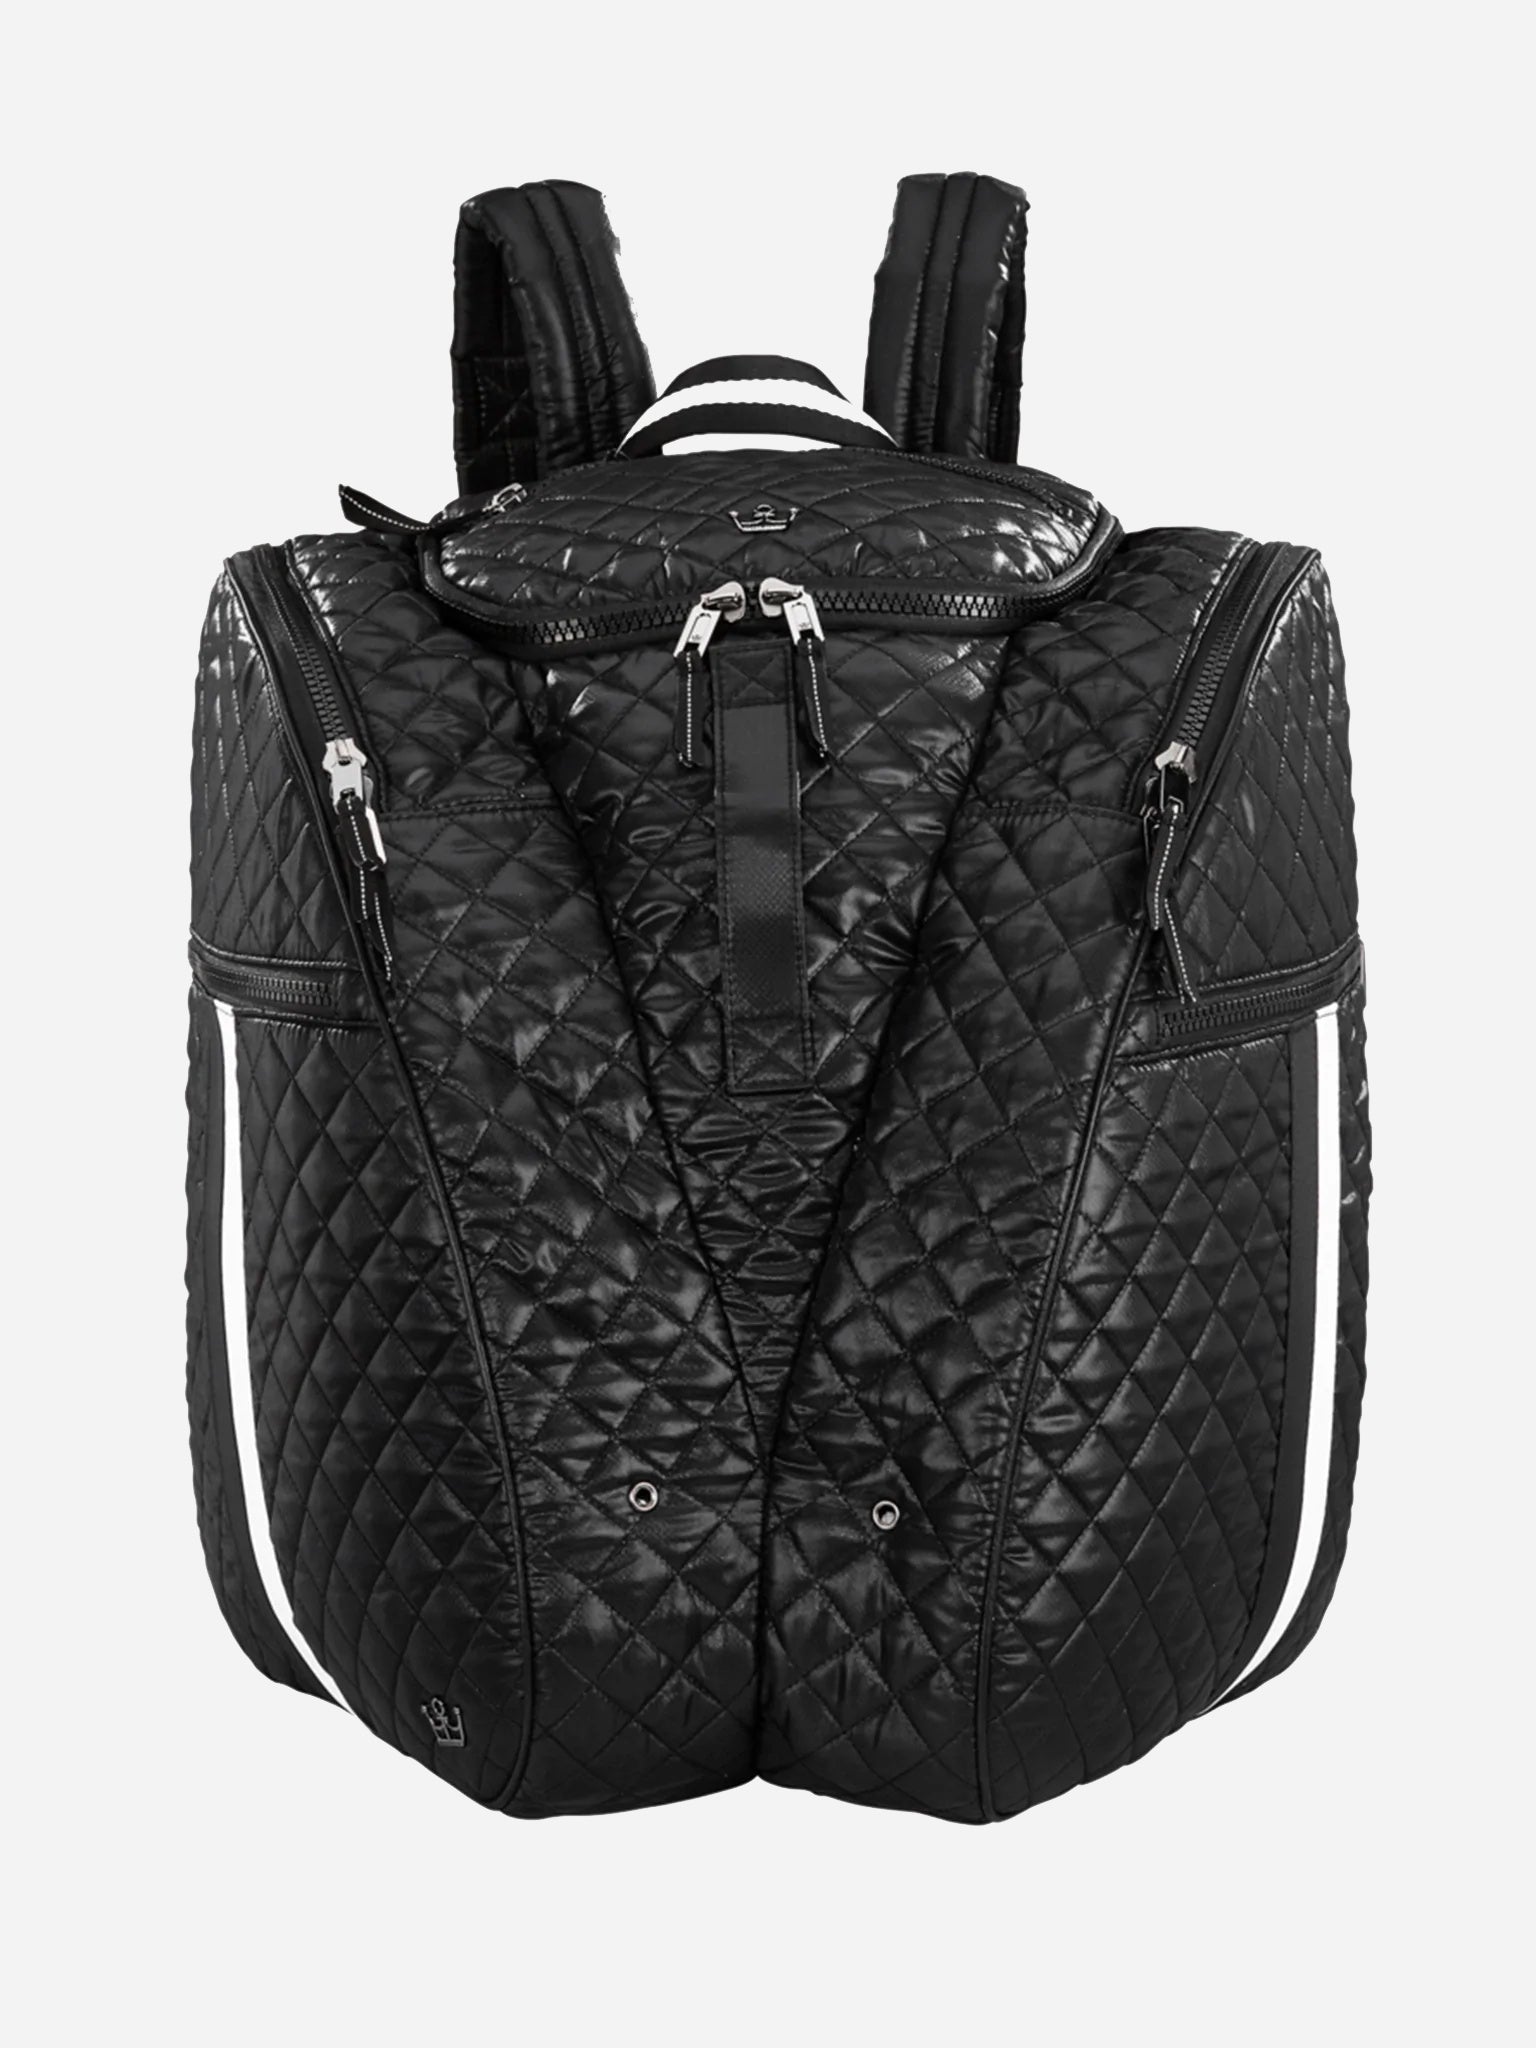 24 + 7 Large Laptop Backpack - Monkee's of Winter Park